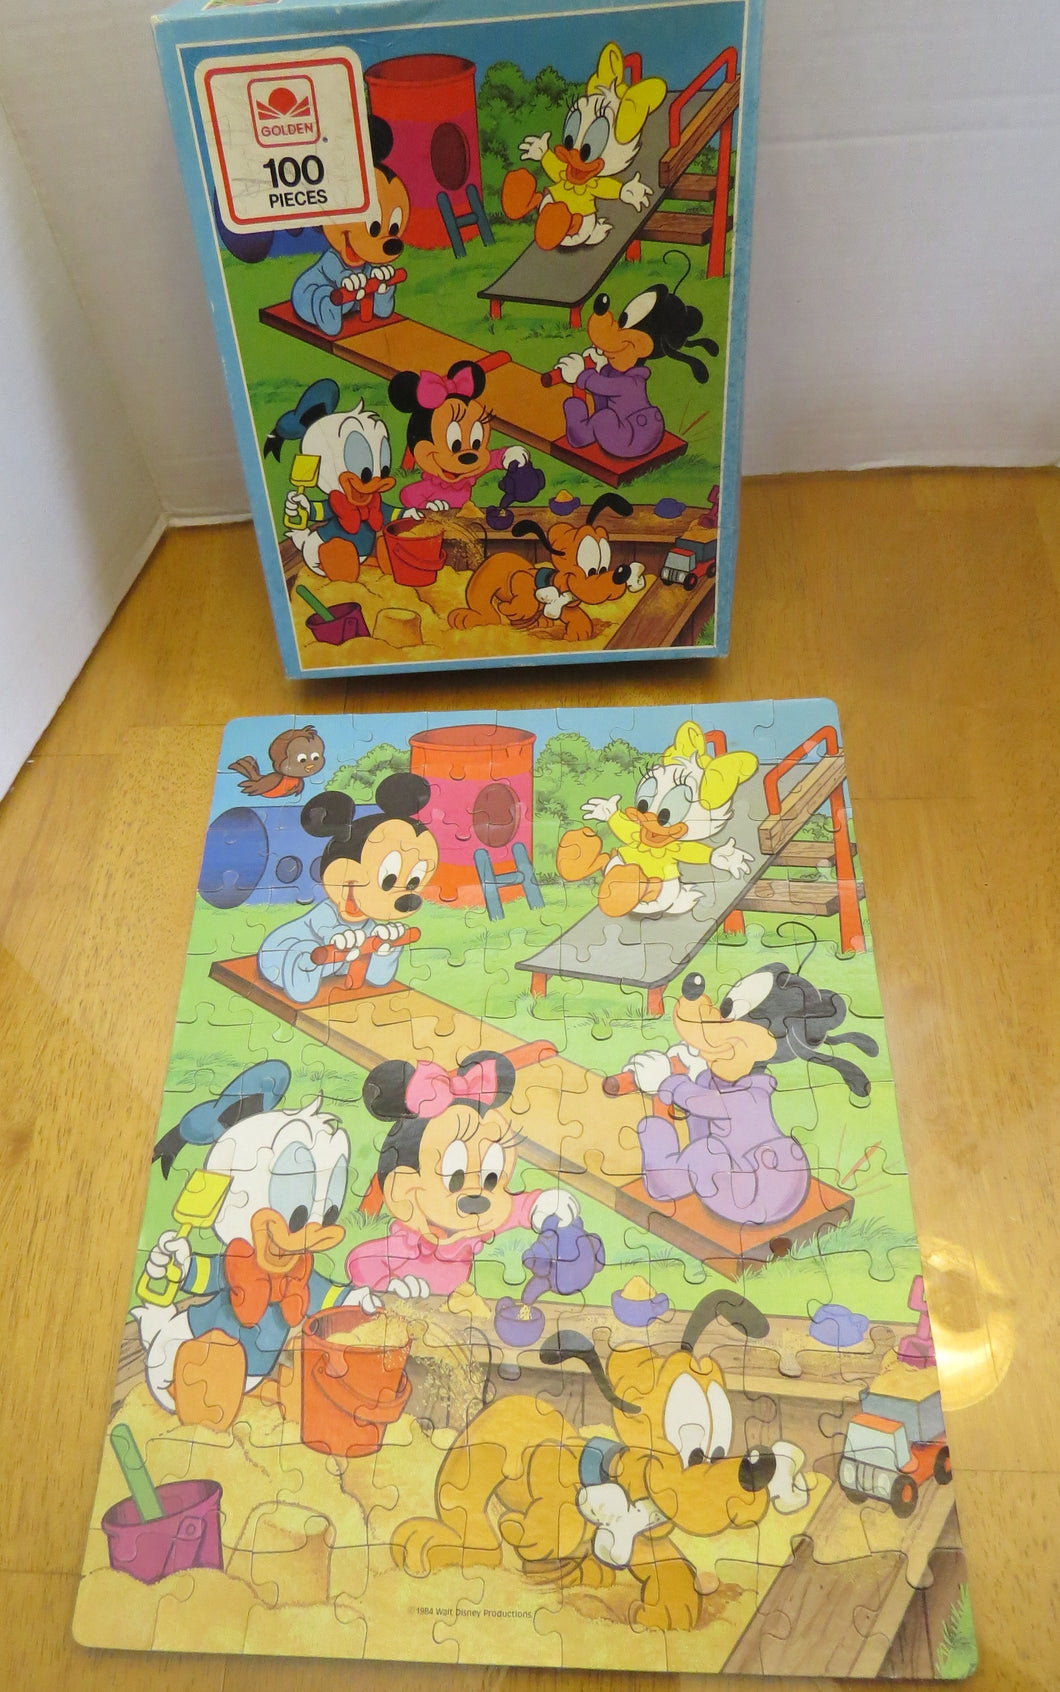 DISNEY BABIES -MICKEY AND FRIENDS - 100 mcx puzzle complete